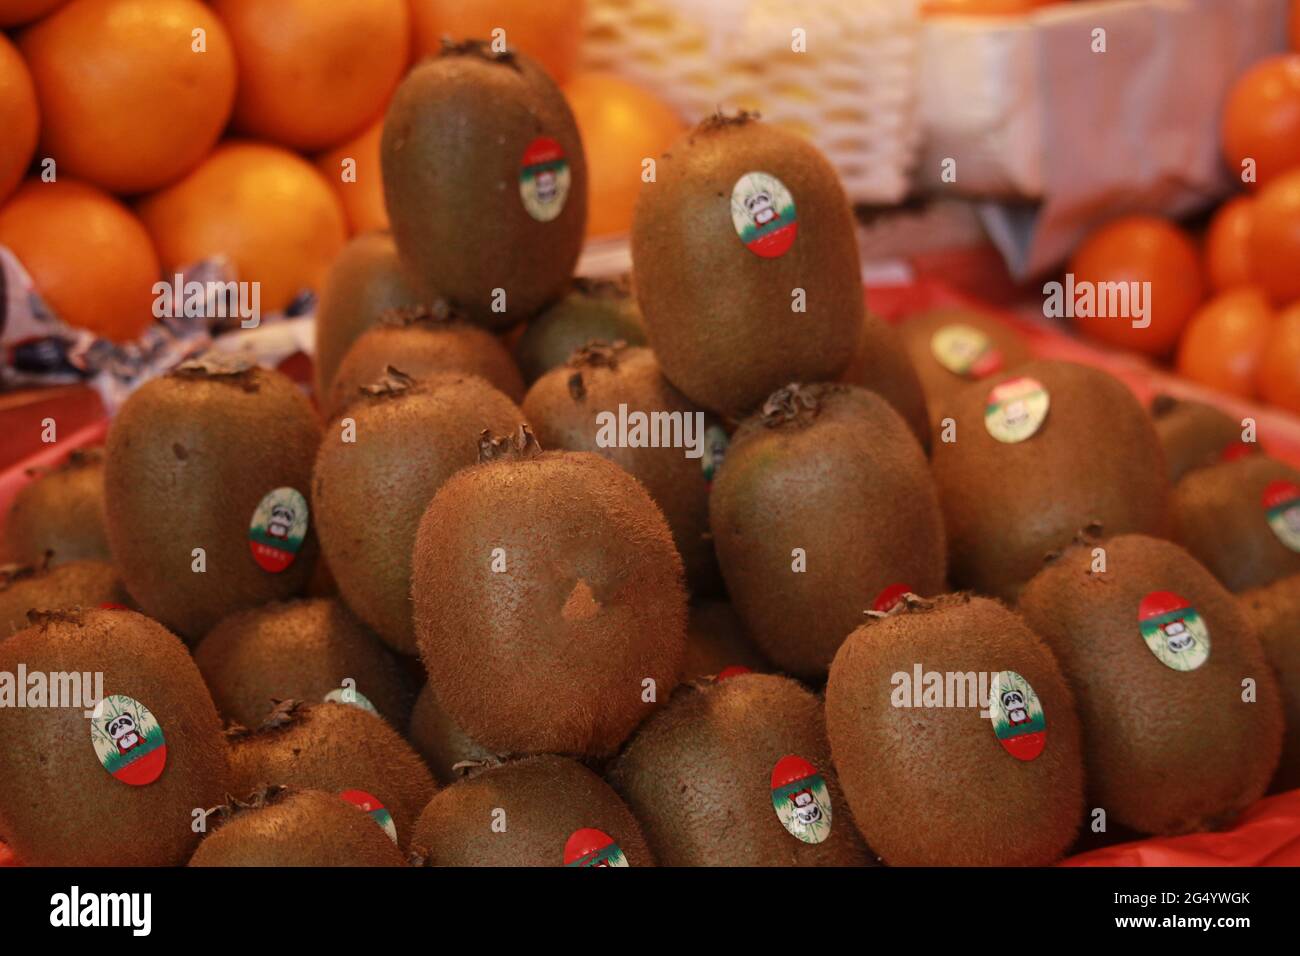 There are many kiwi sorted for sale Stock Photo